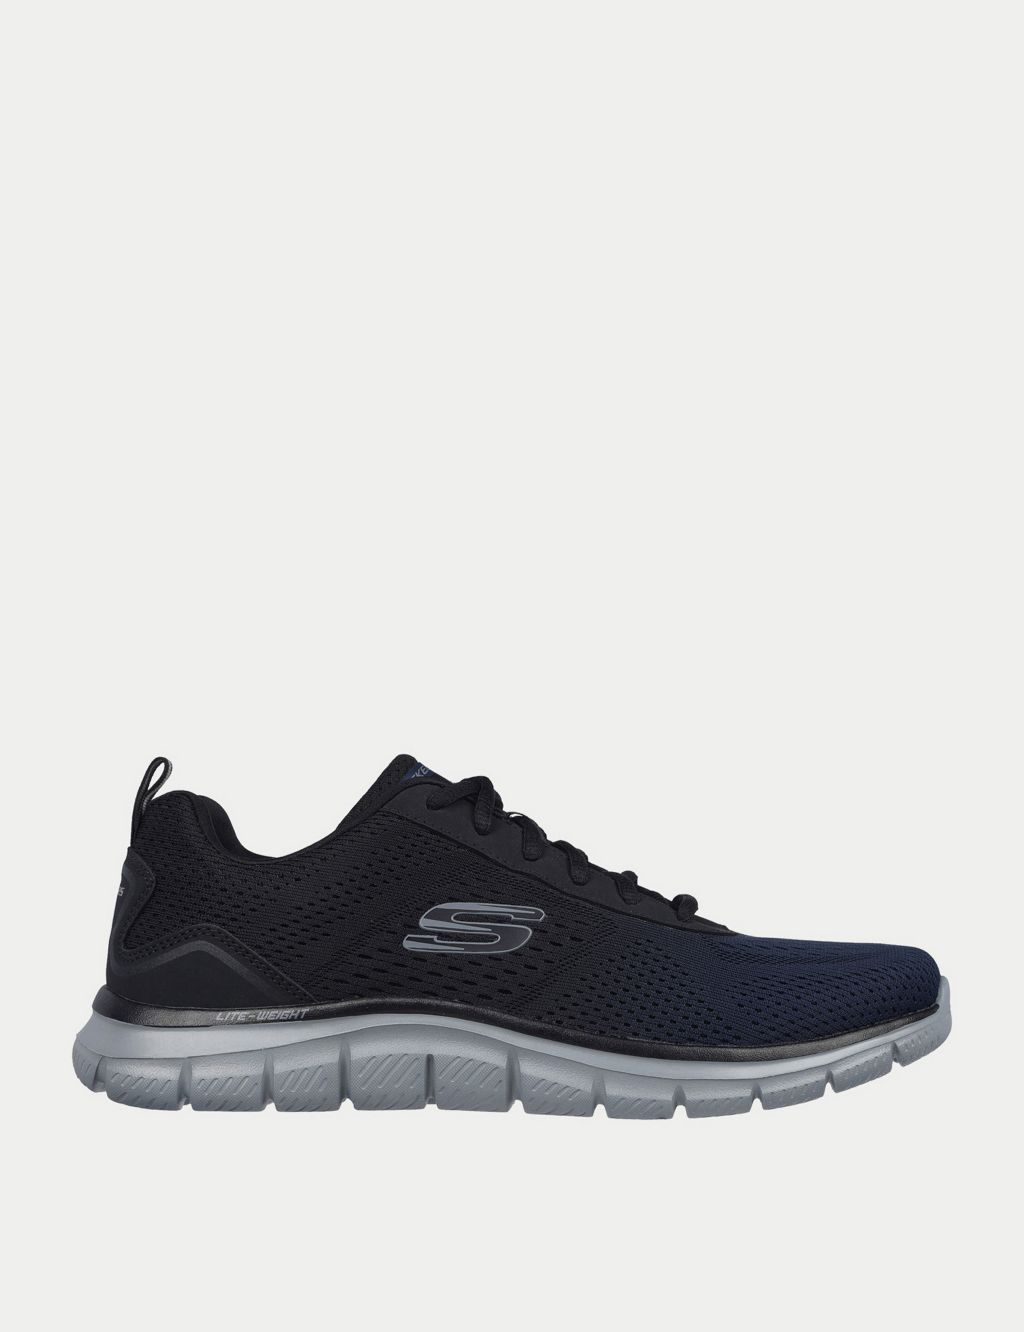 Track Ripkent Lace Up Trainers image 1